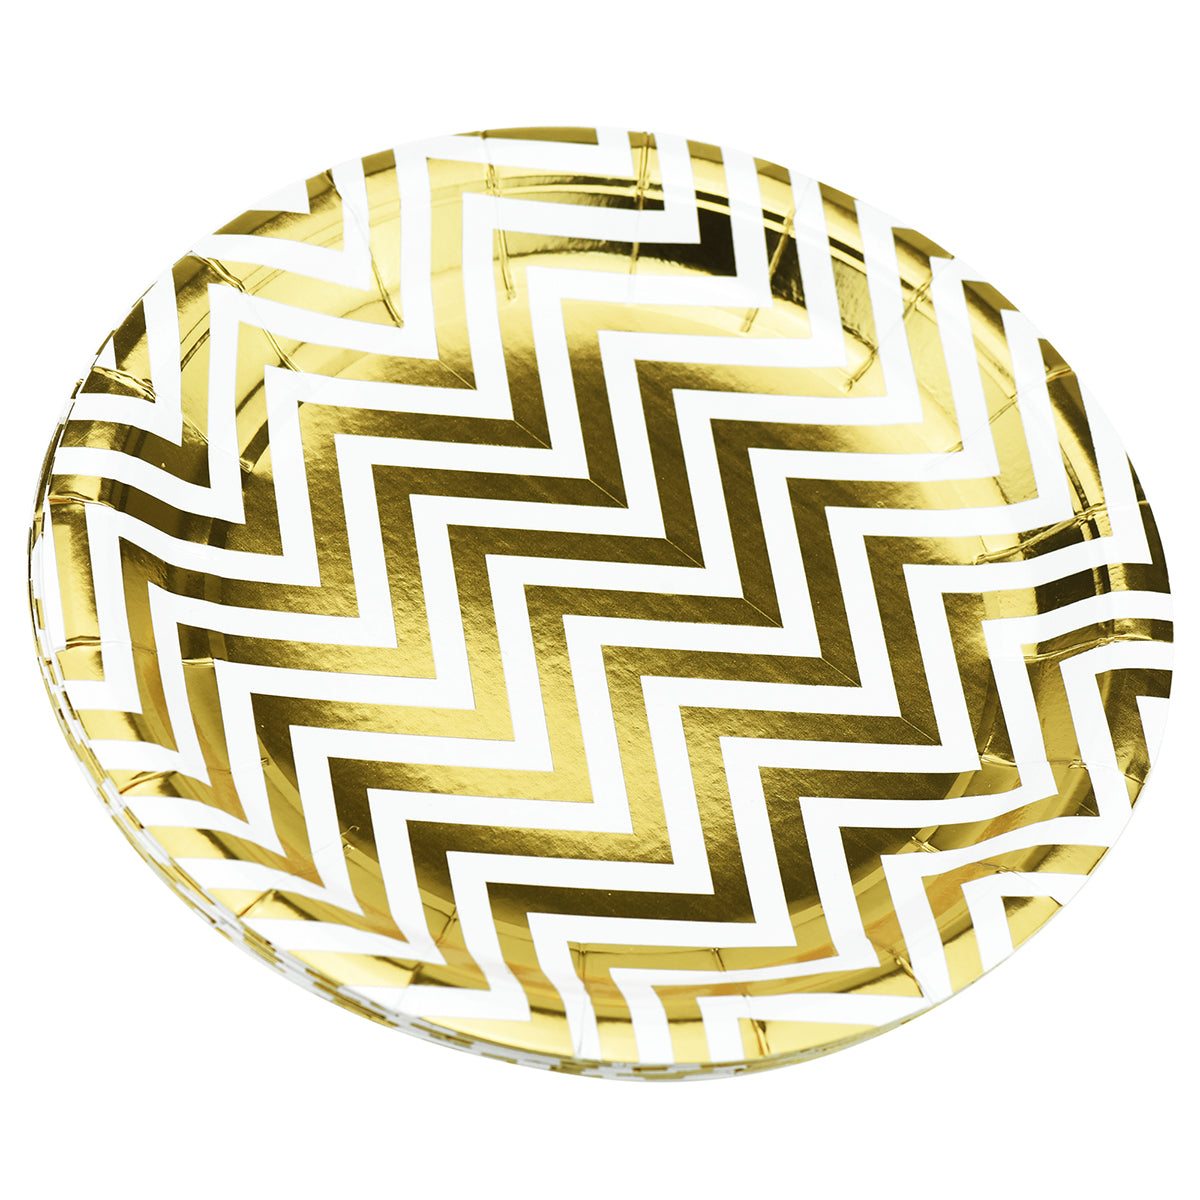 16 stacked gold and white zigzag designed round paper plates display with a white background